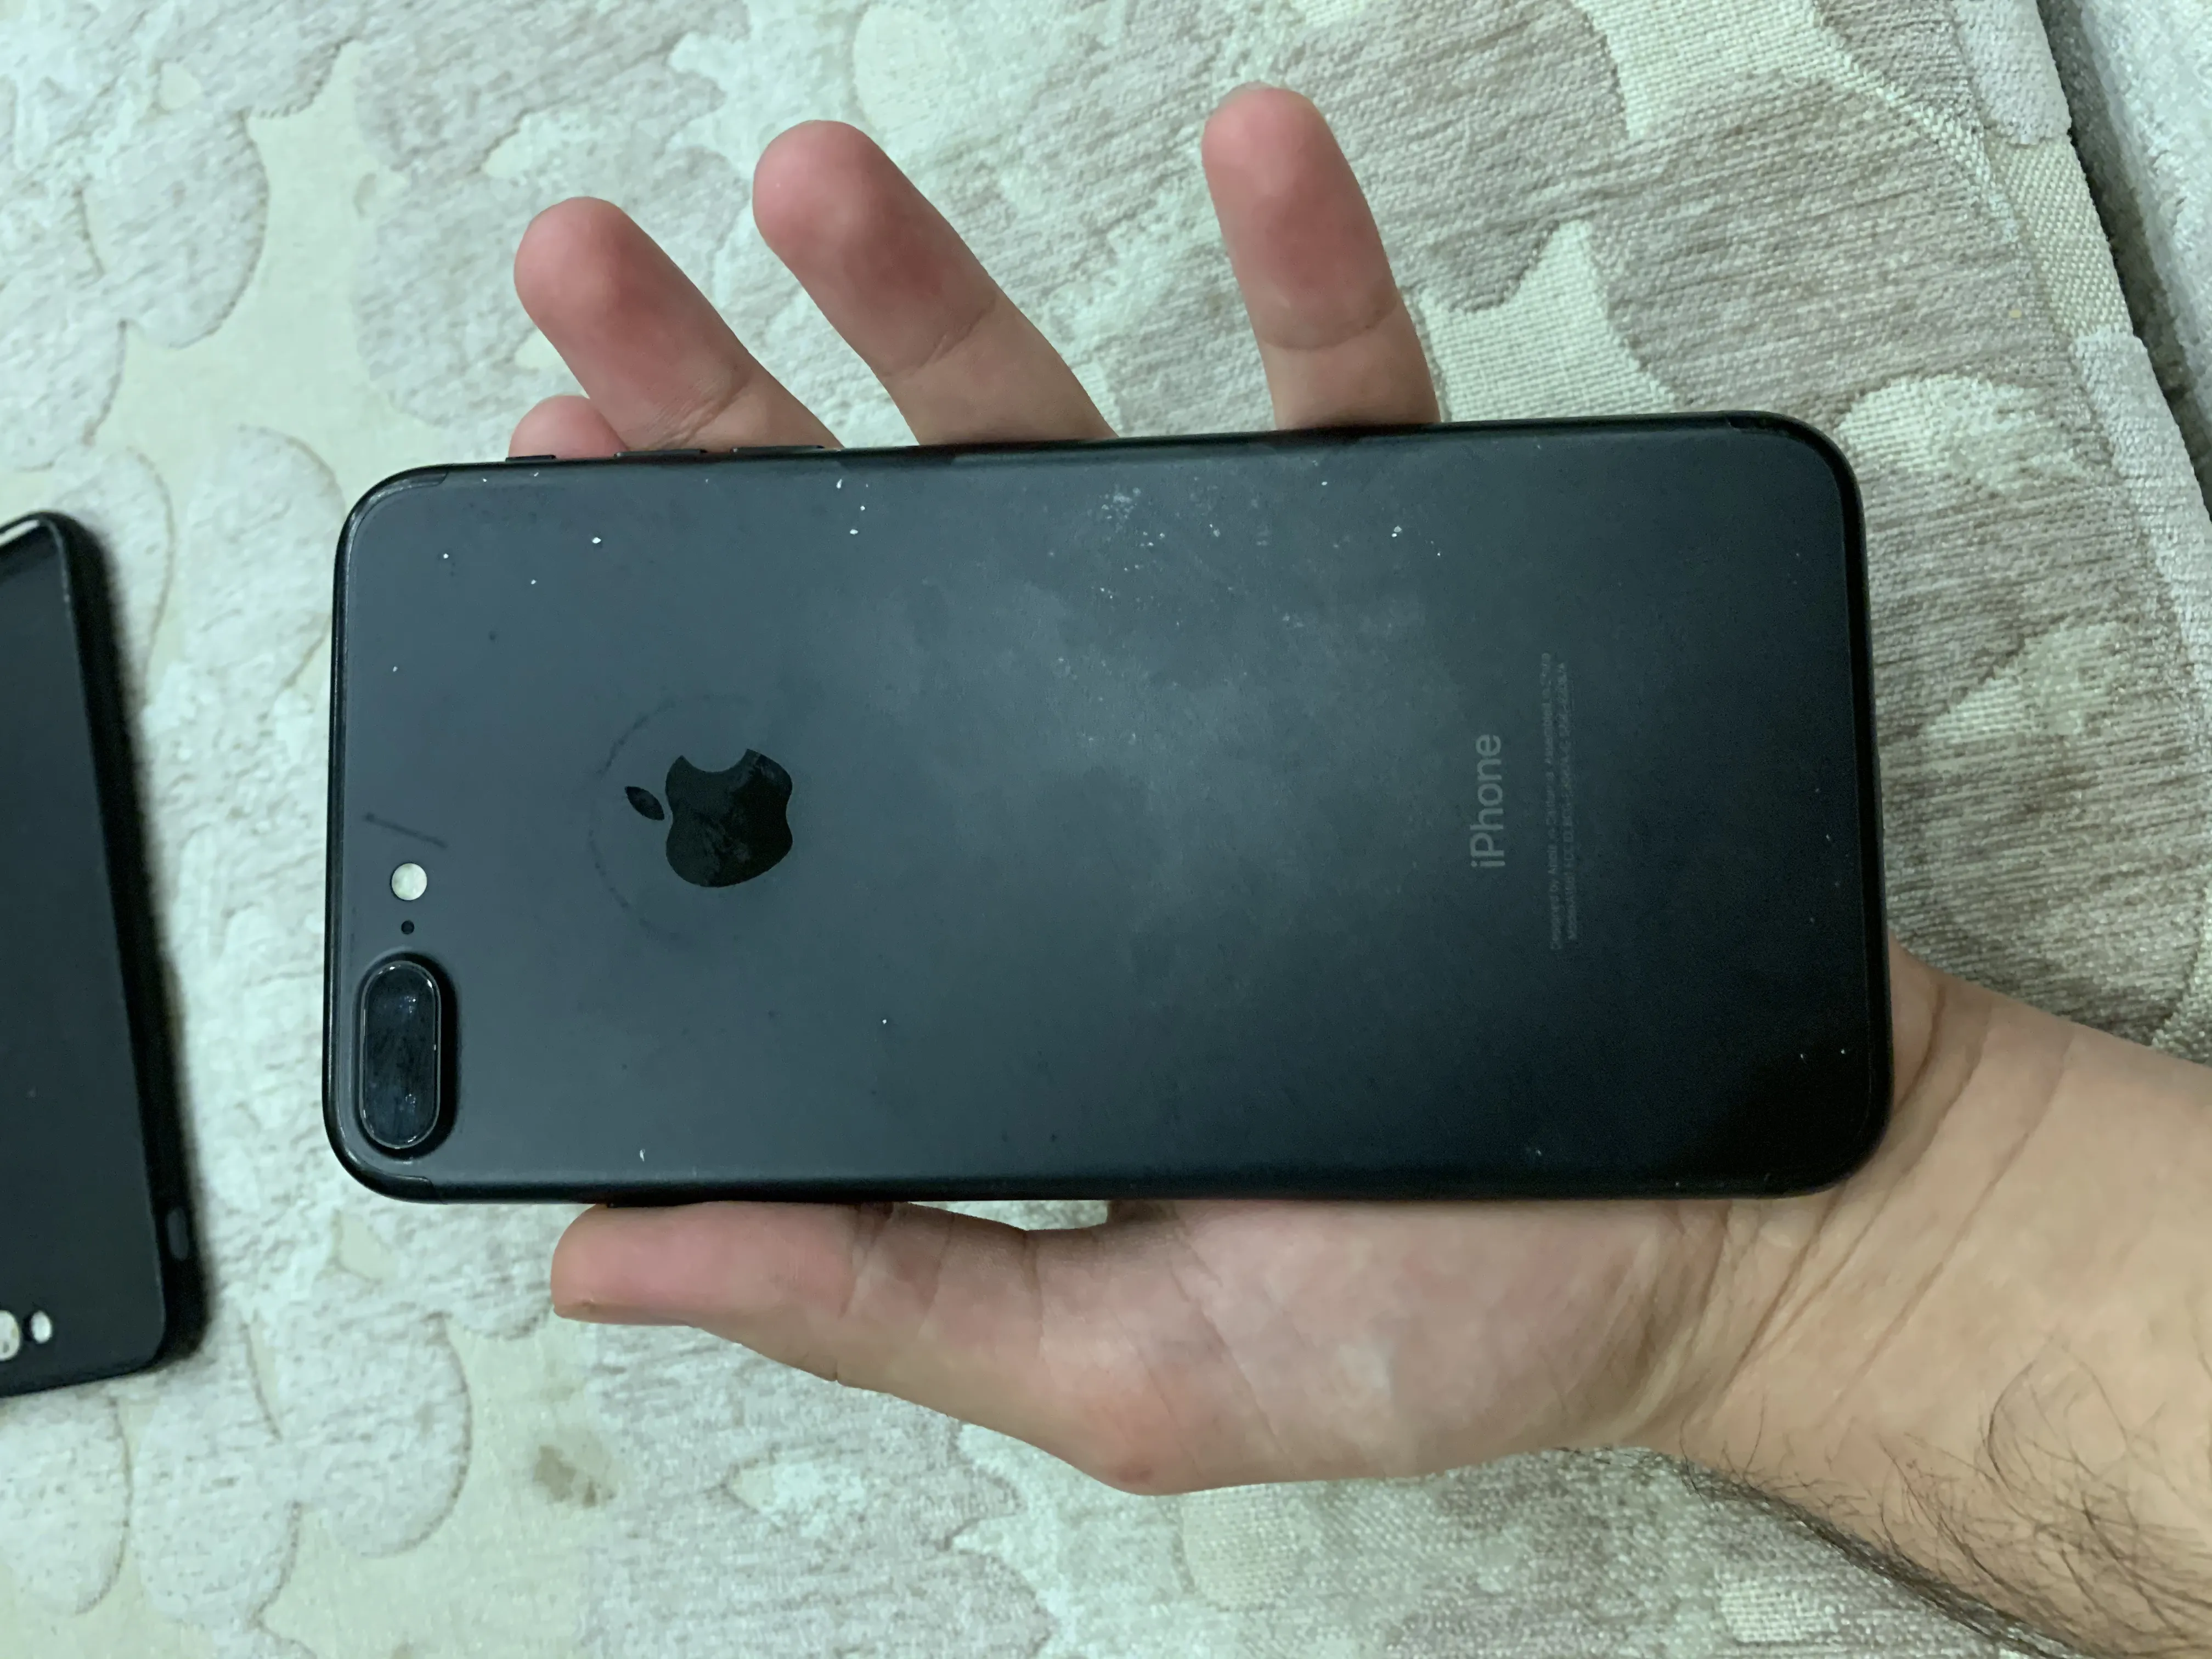 IPHONE 7 plus 32gb for sale - photo 1